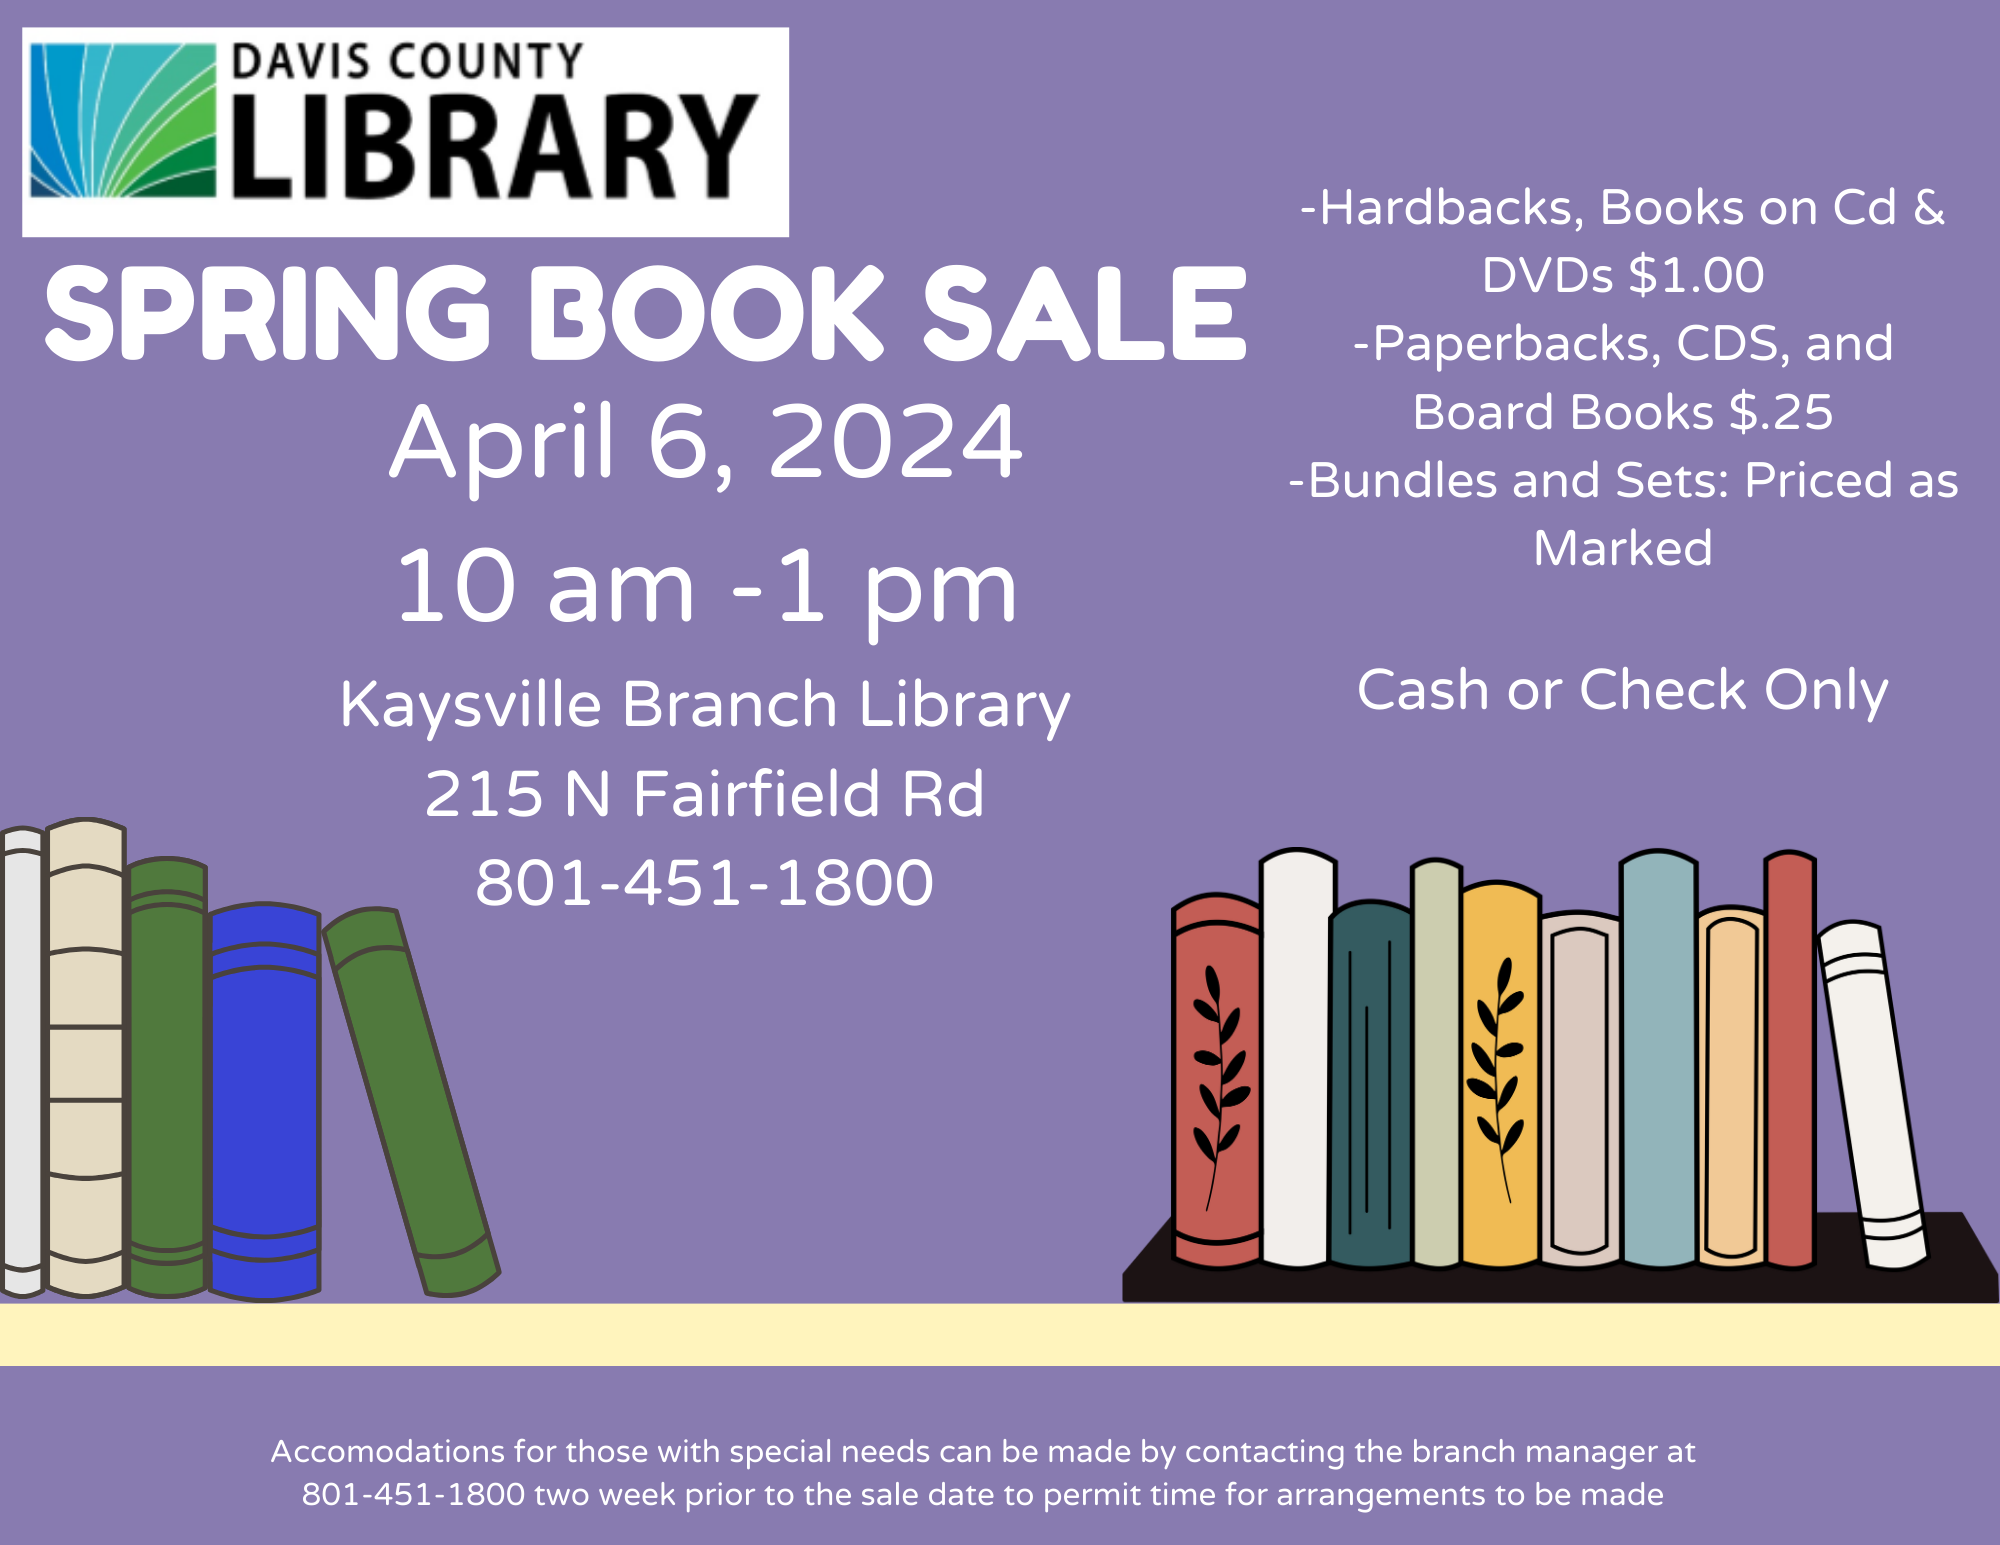 Spring Book Sale. April 6, 2024 from 10-1